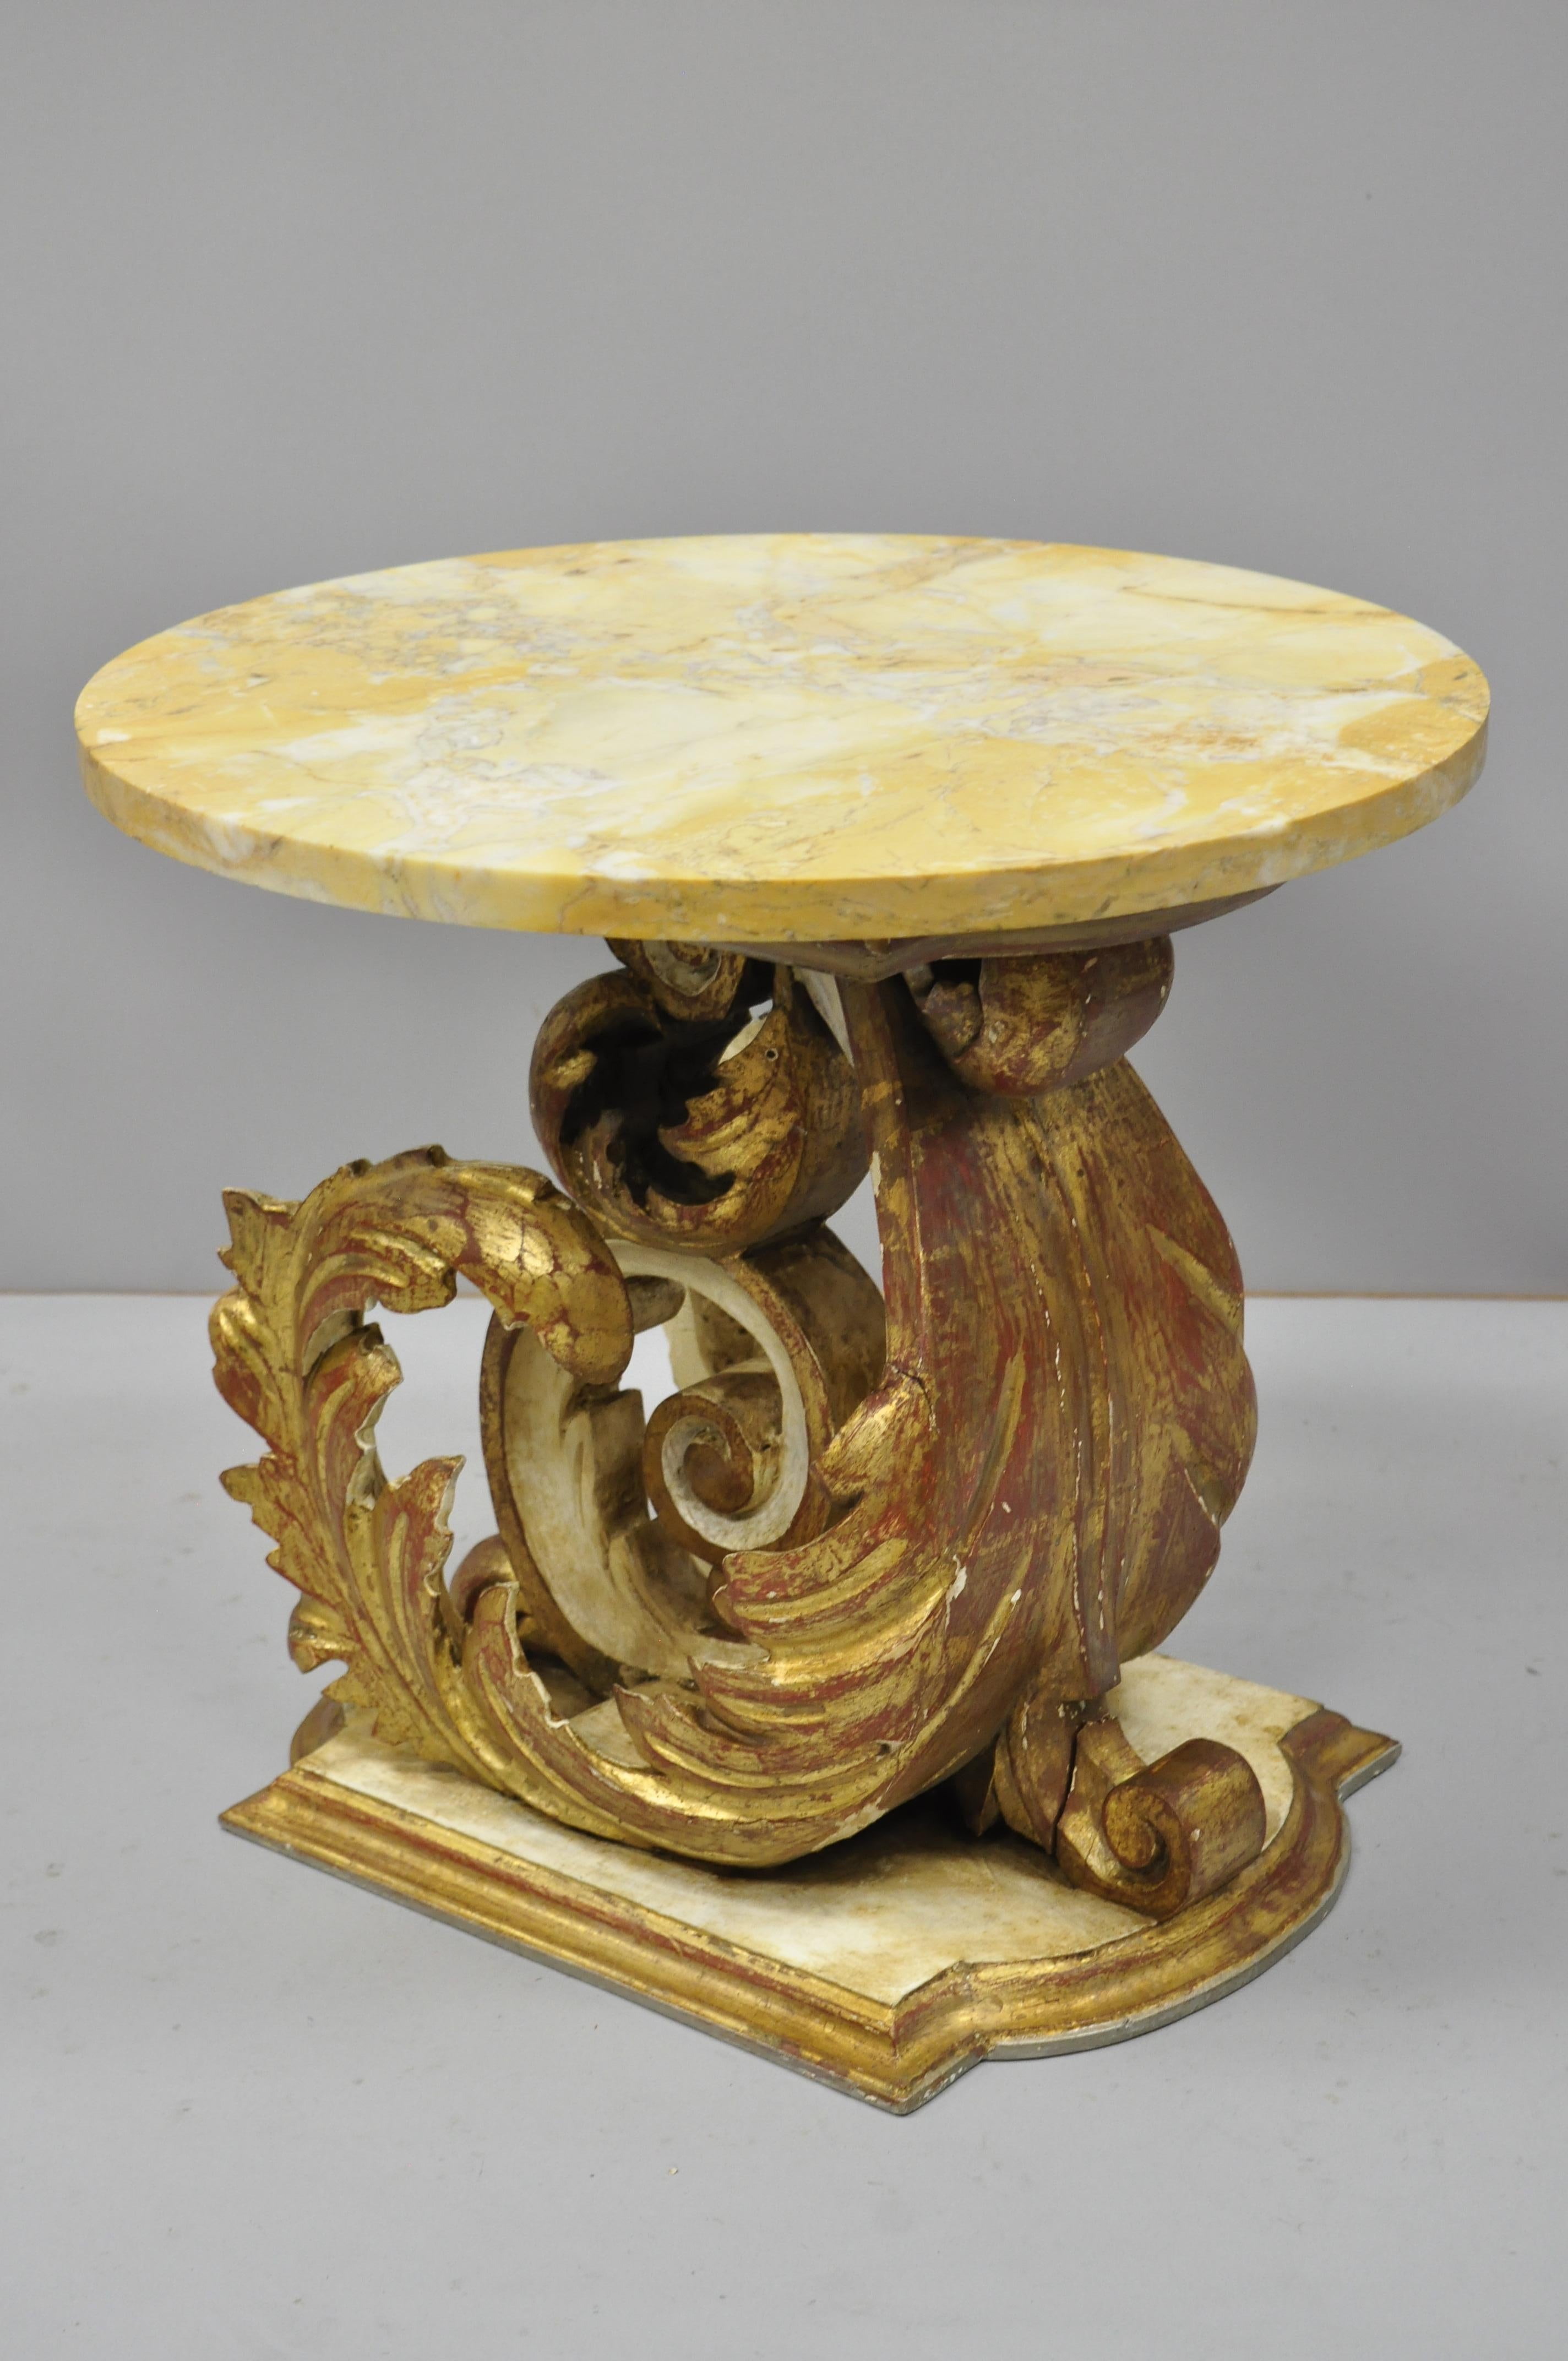 Italian neoclassical style round marble-top giltwood floral scroll accent side table. Item features solid carved and parcel giltwood base, round marble top, leafy floral scroll design, great style and form, circa early to mid-20th century.